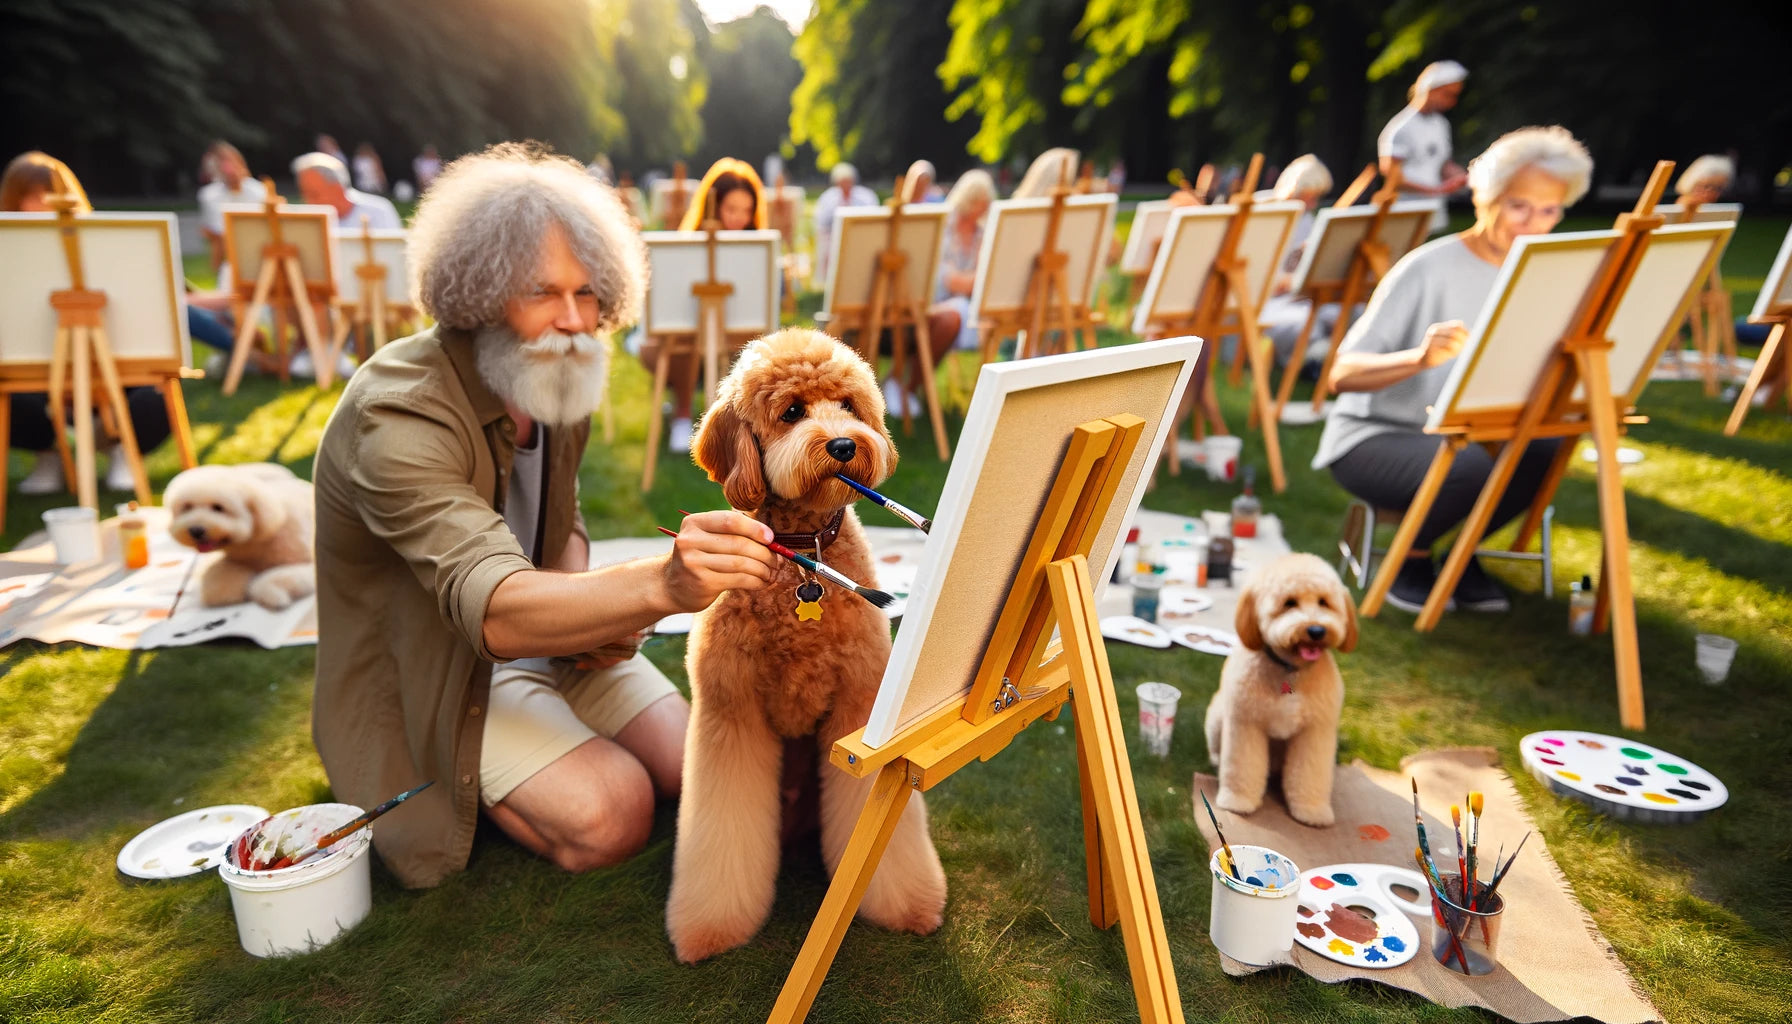 Mini Goldendoodle and its owner participating in a dog-friendly outdoor painting class, surrounded by easels and canvases.